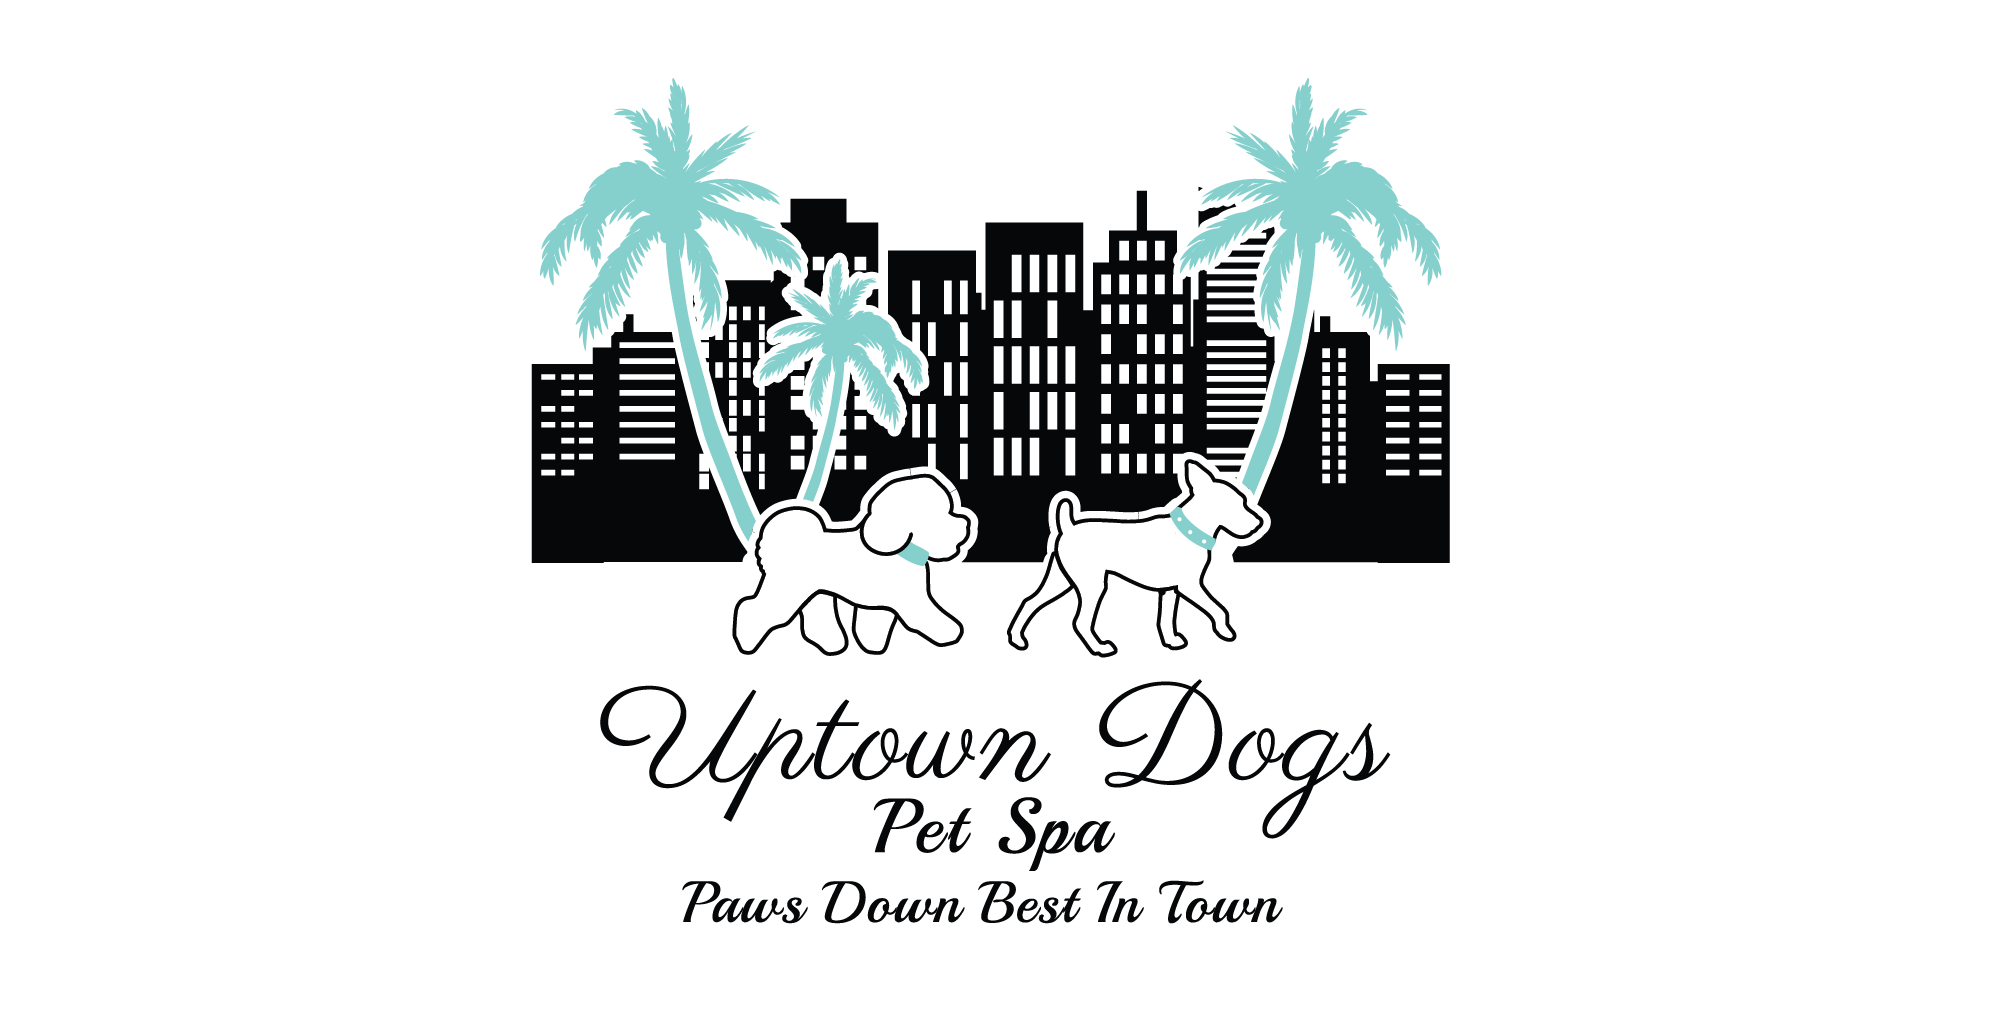 Uptown Dogs Pet Spa